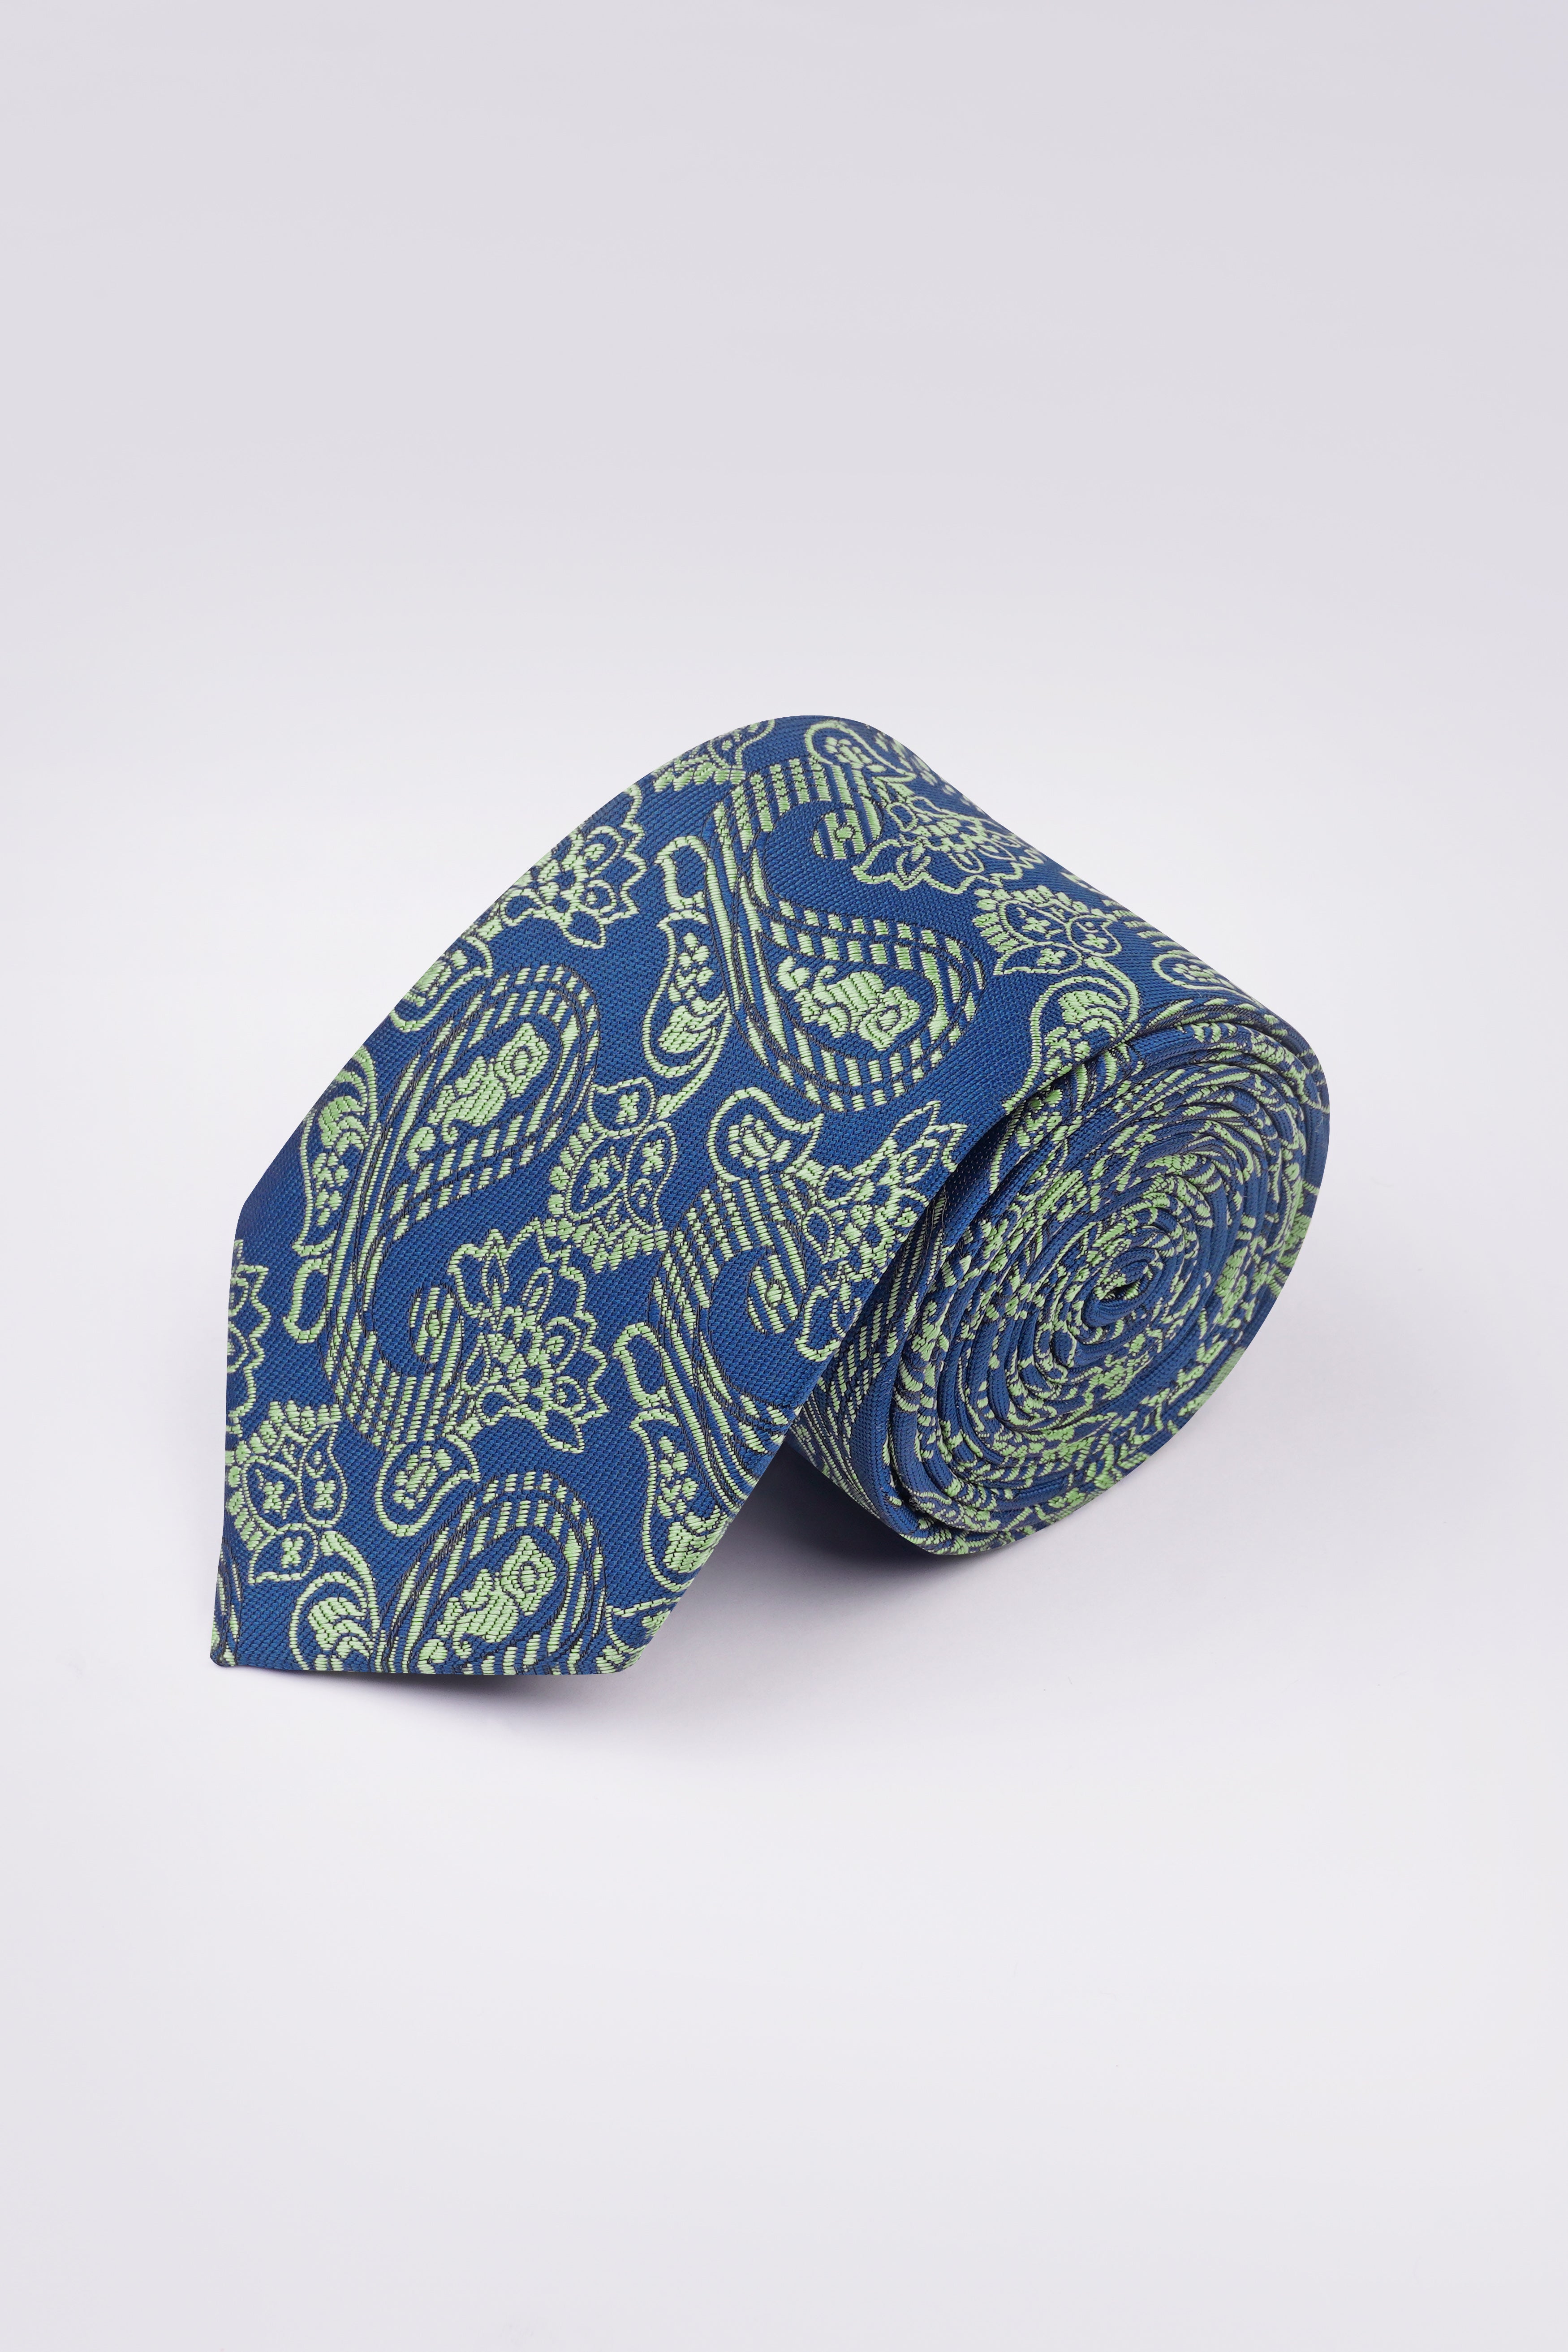 Astronaut Blue with Schist Green Paisley Jacquard Tie with Pocket Square TP062